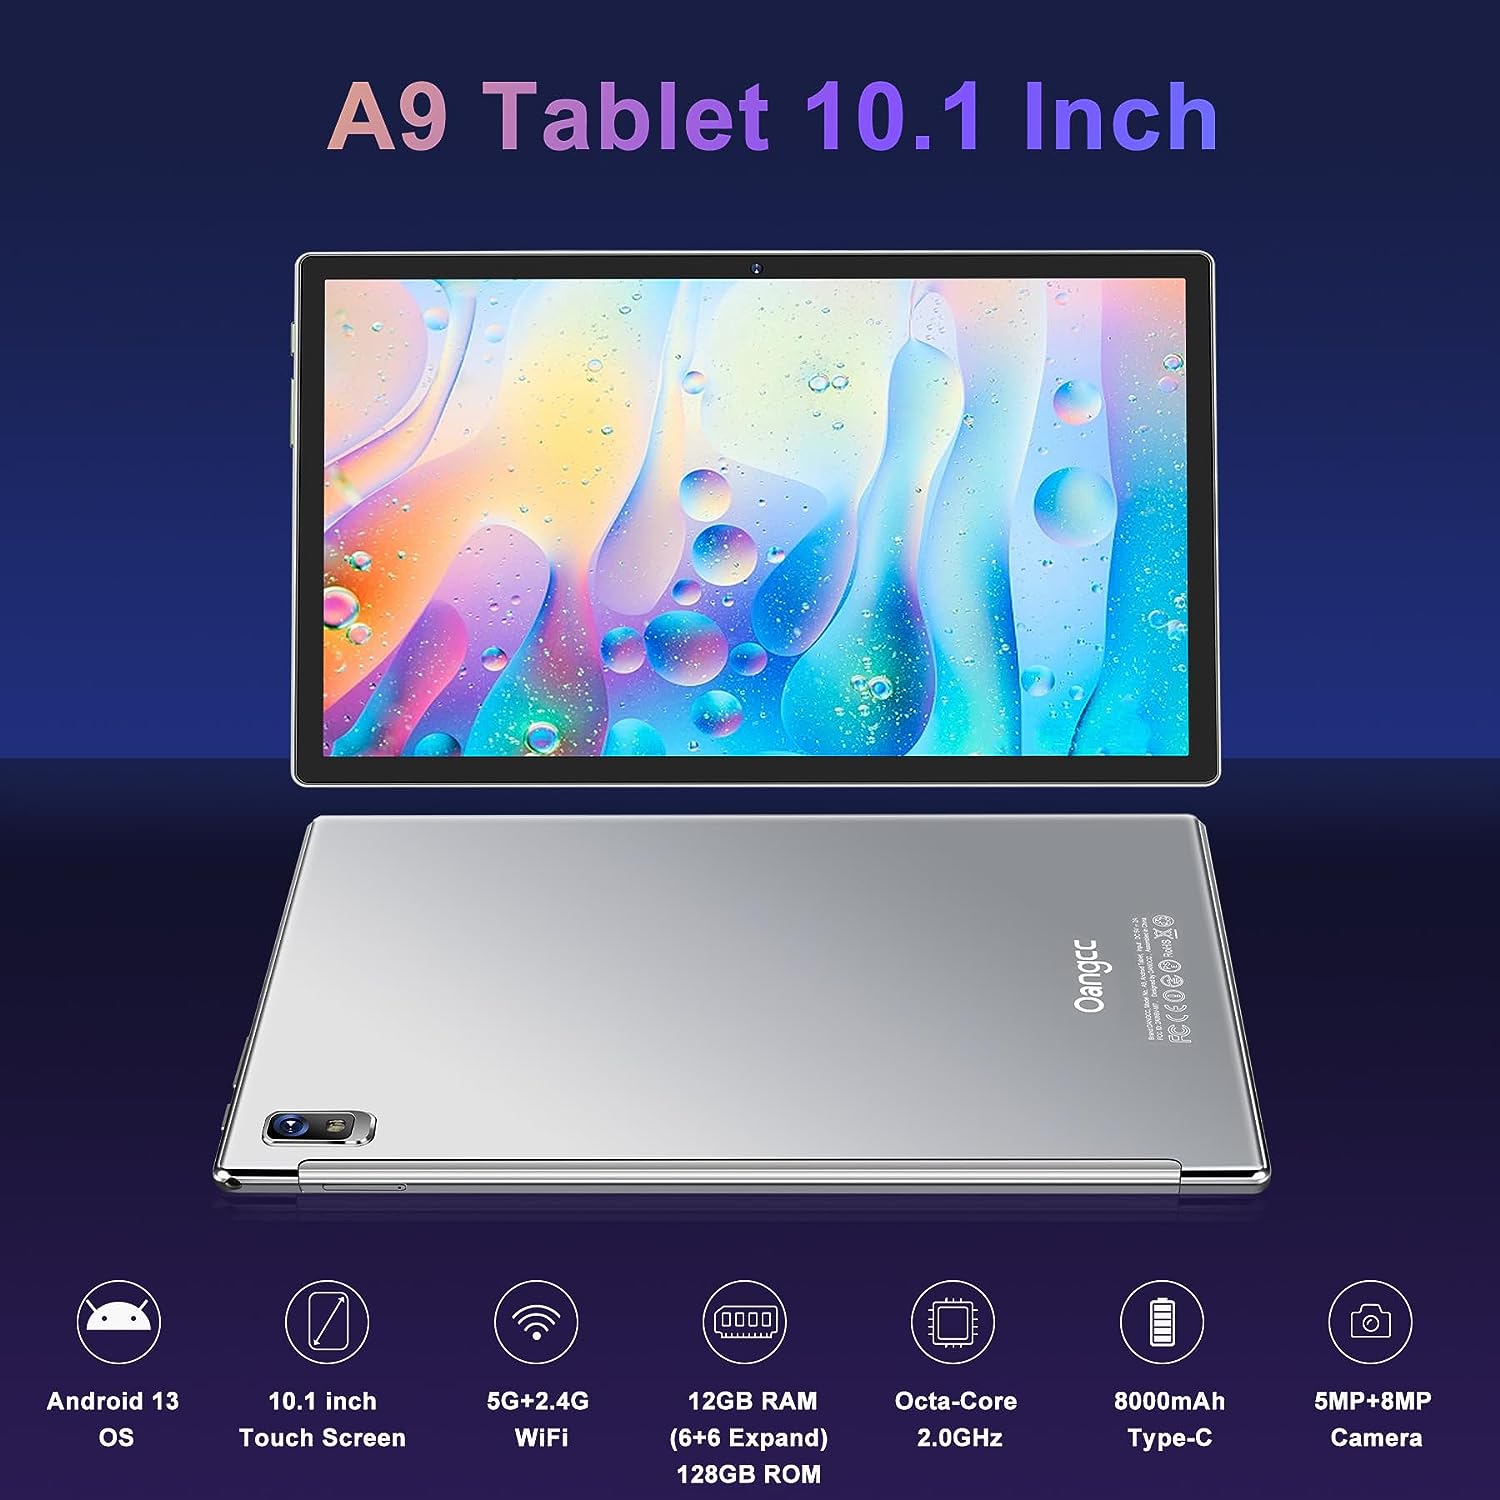 Oangcc Android 13 Tablet 10 Inch 𝟐𝟎𝟐𝟑 𝐋𝐚𝐭𝐞𝐬𝐭 Review